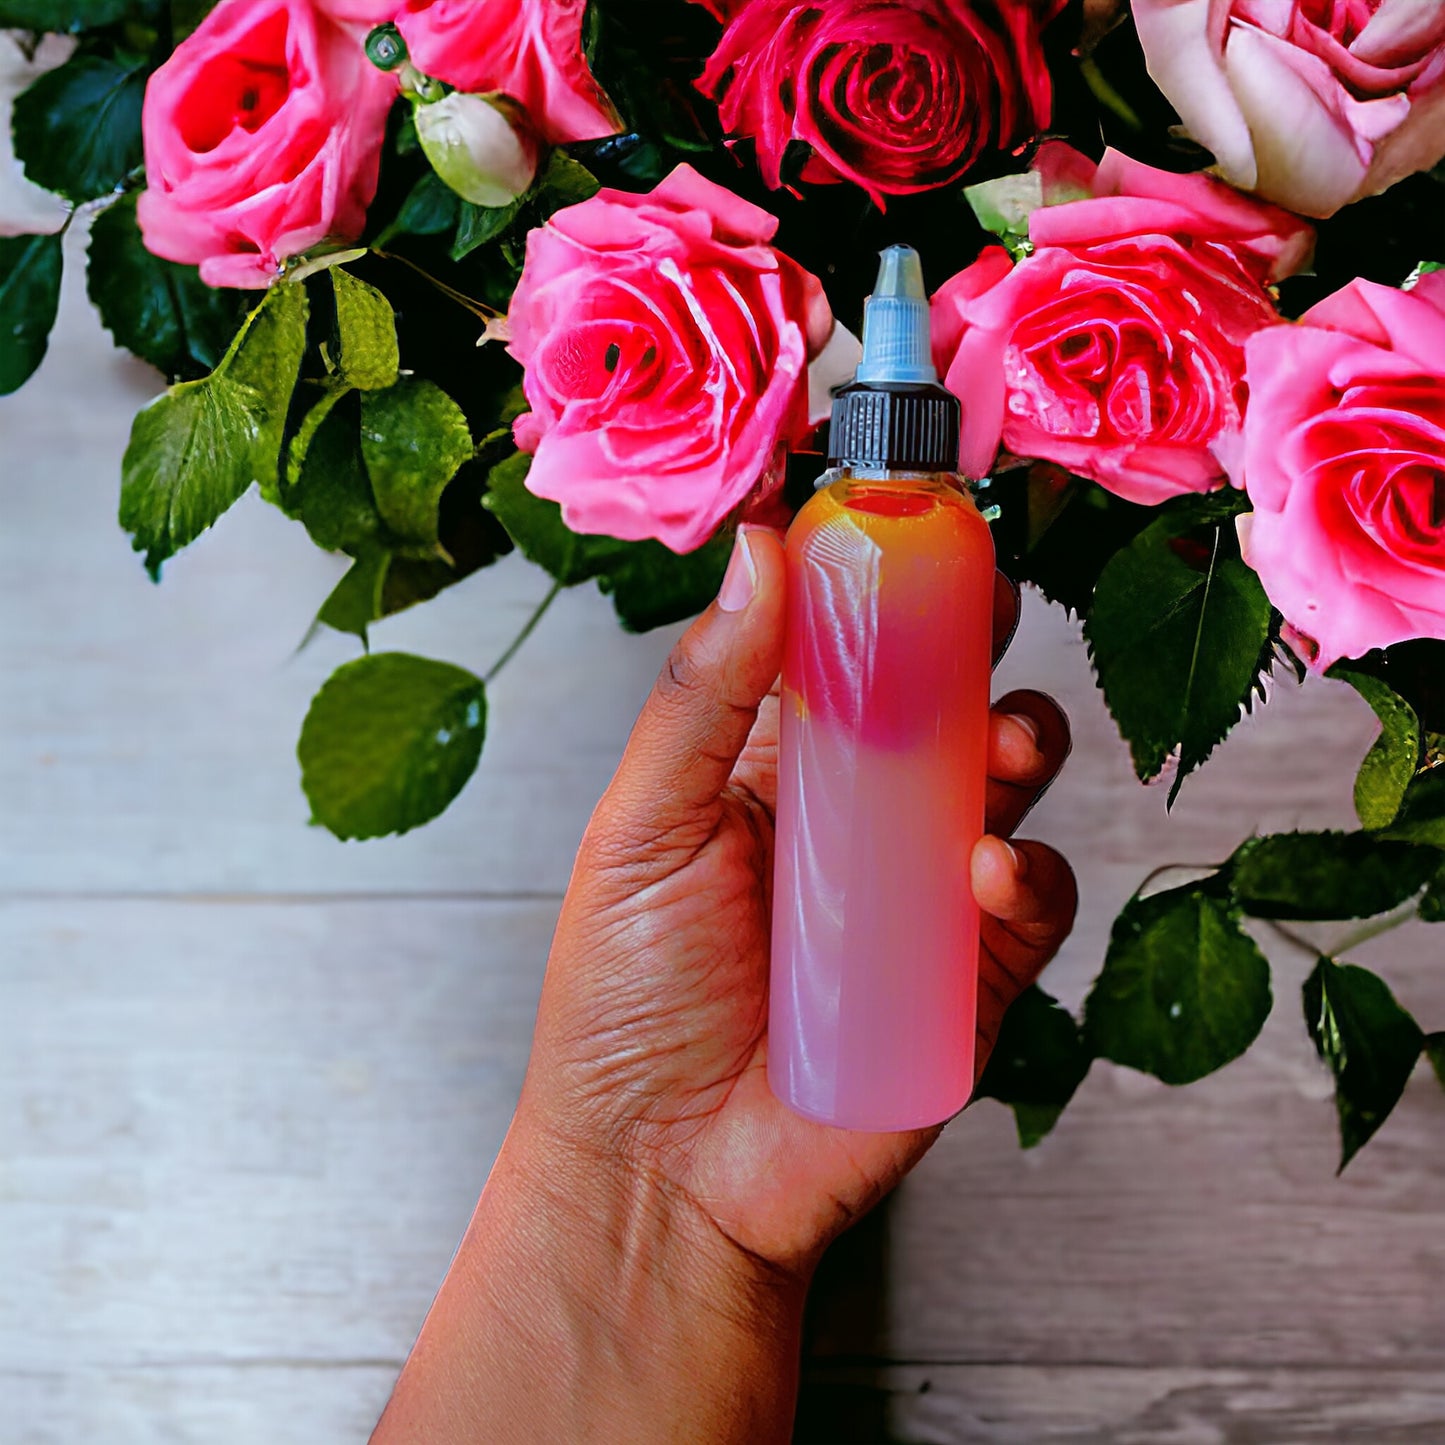 Rose water: hydration for Locs